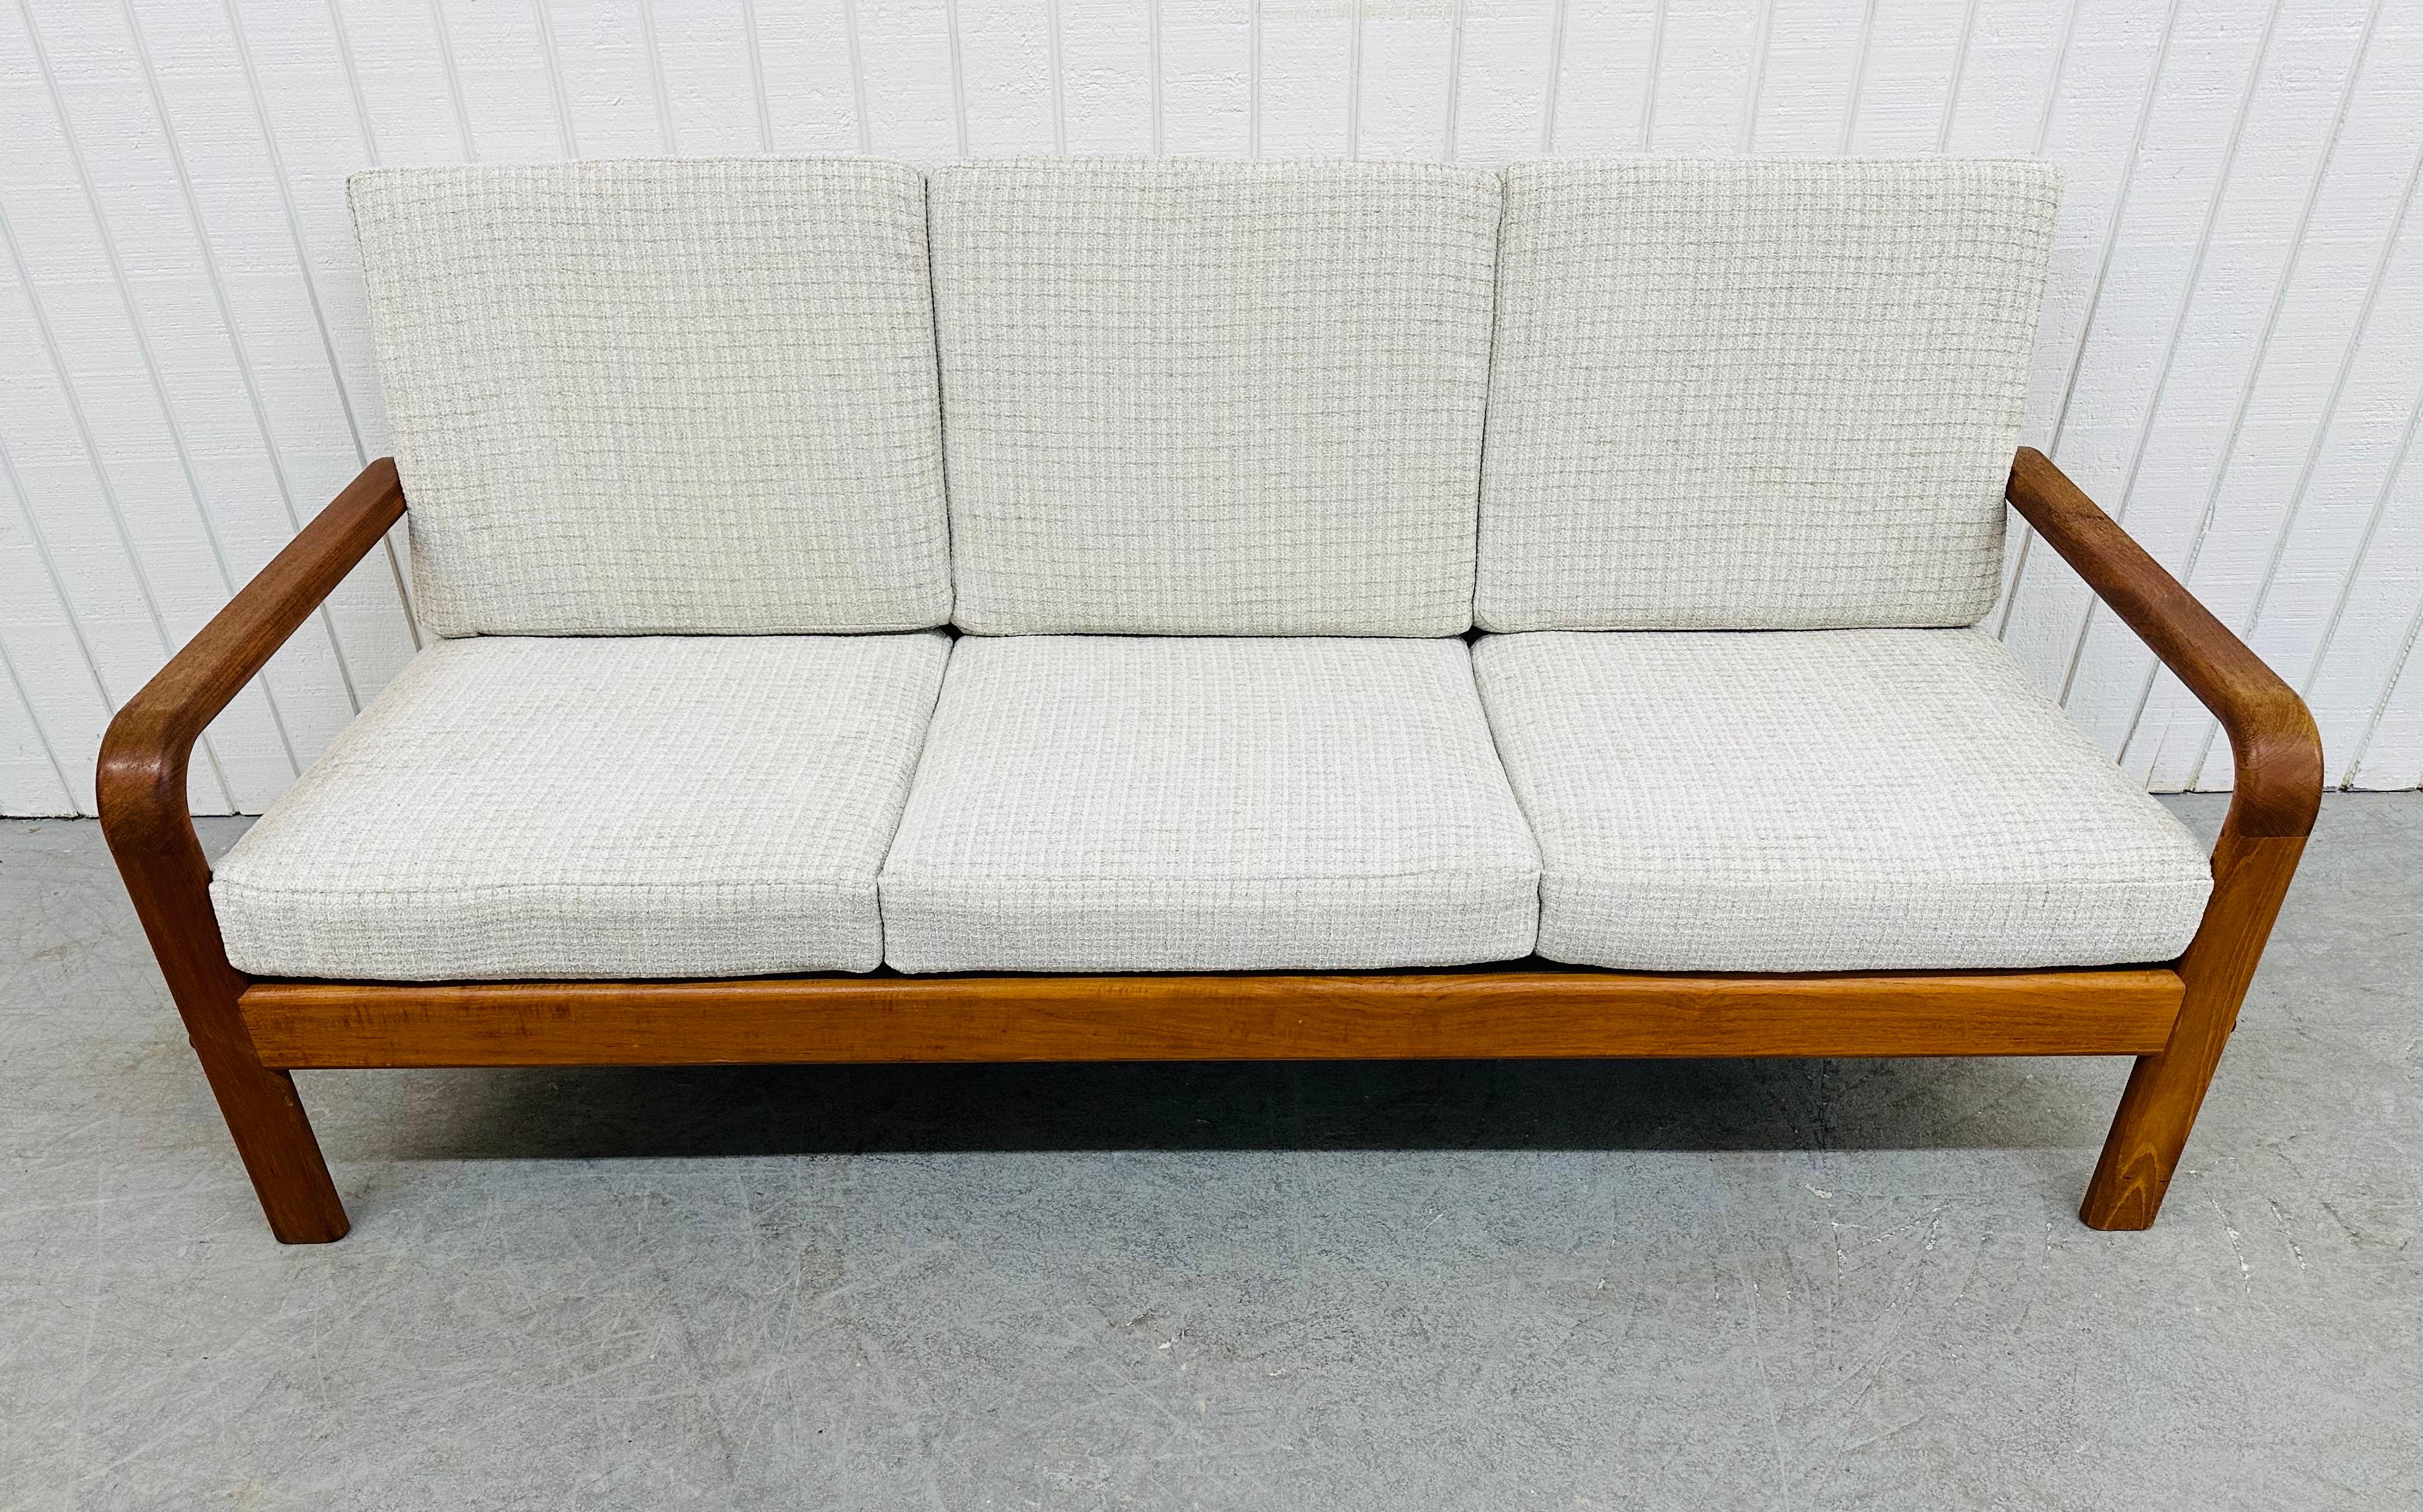 This listing is for a Vintage Danish Modern Teak Sofa. Featuring a teak frame, newly upholstered cushions, and seating space for up to three people. This is an exceptional combination of quality and design!